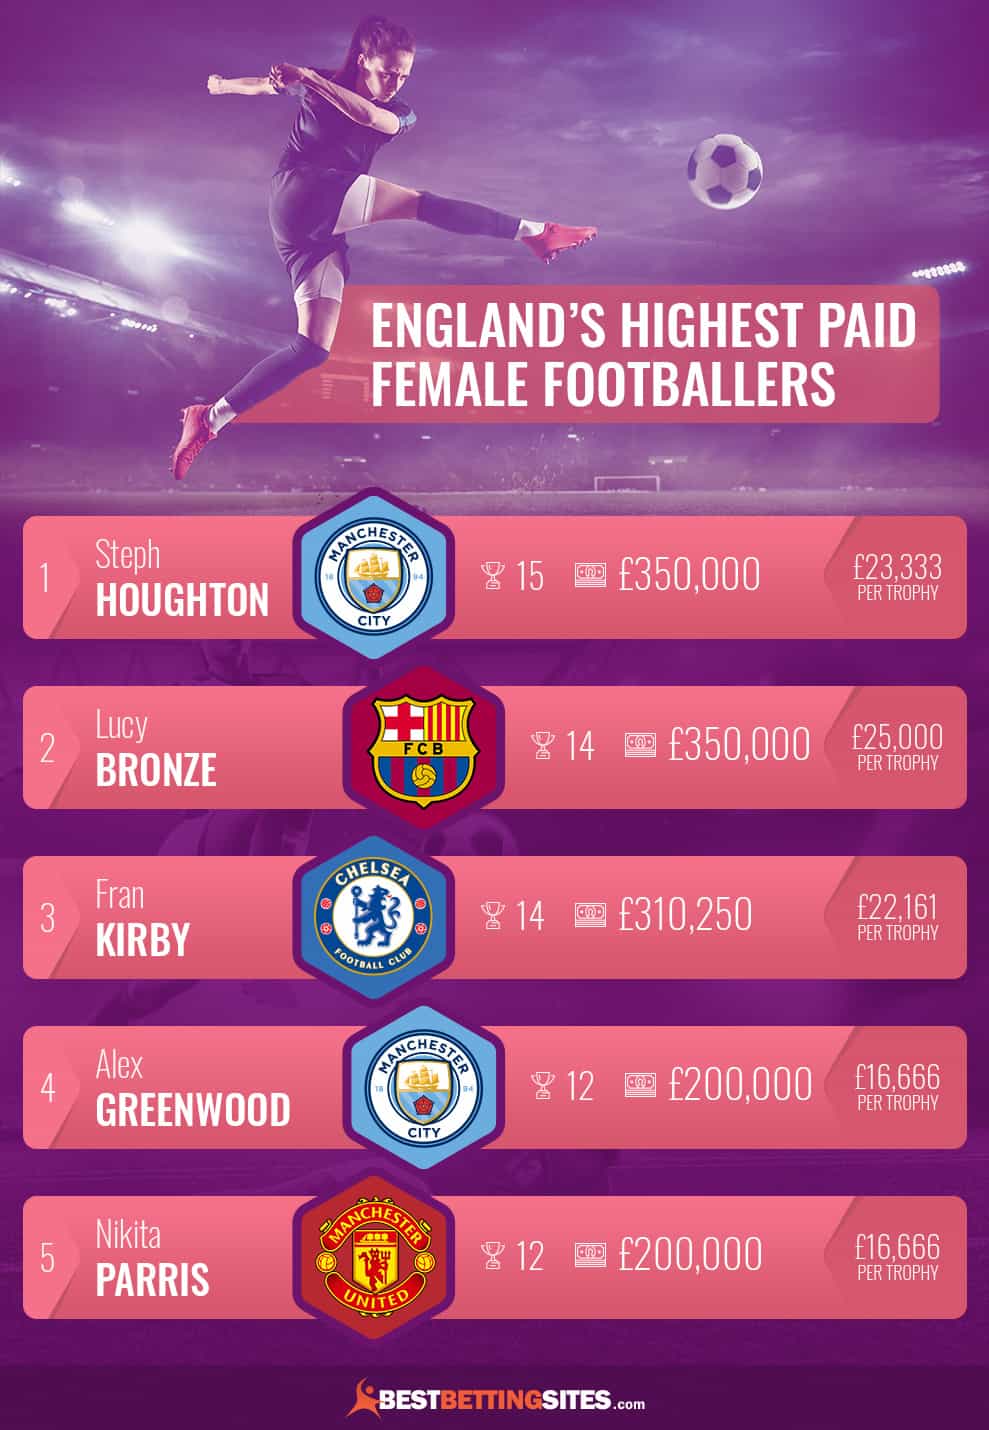 A list of the top five female footballers from England, with badges, trophies, and salary info.